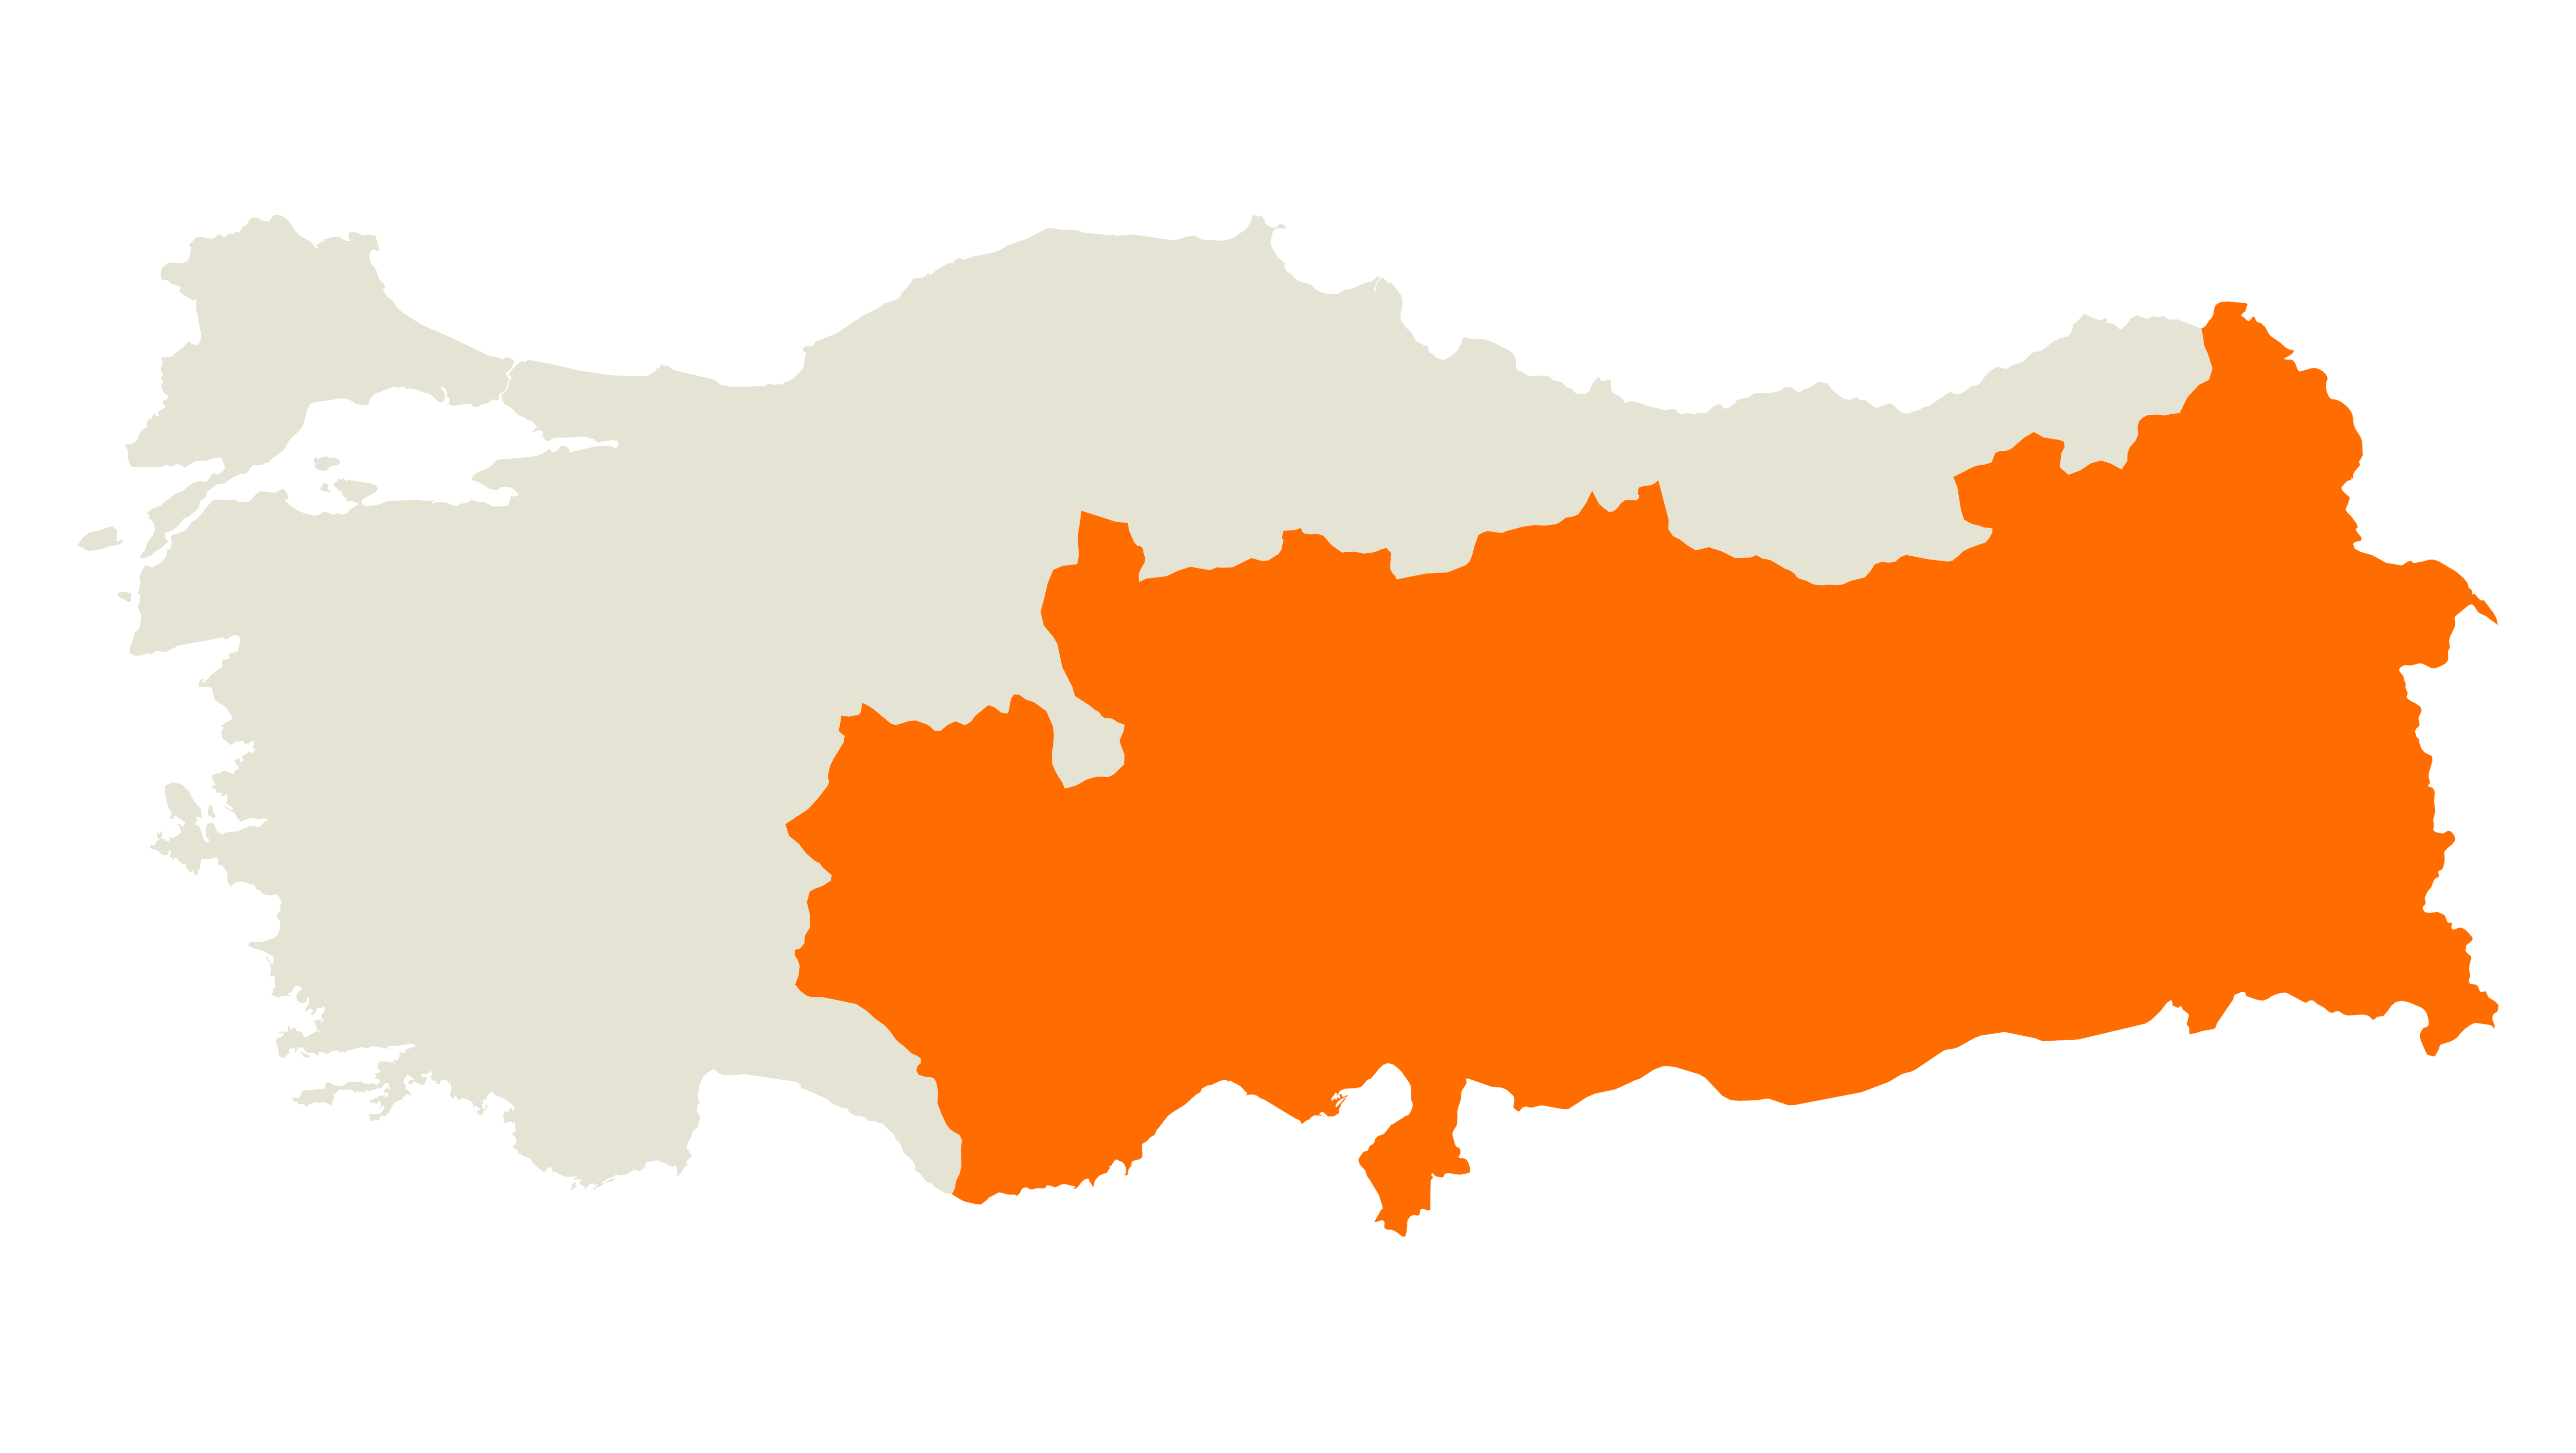 kws-tr-consultant-map-corn-ali-aytekin-map-without-name.png